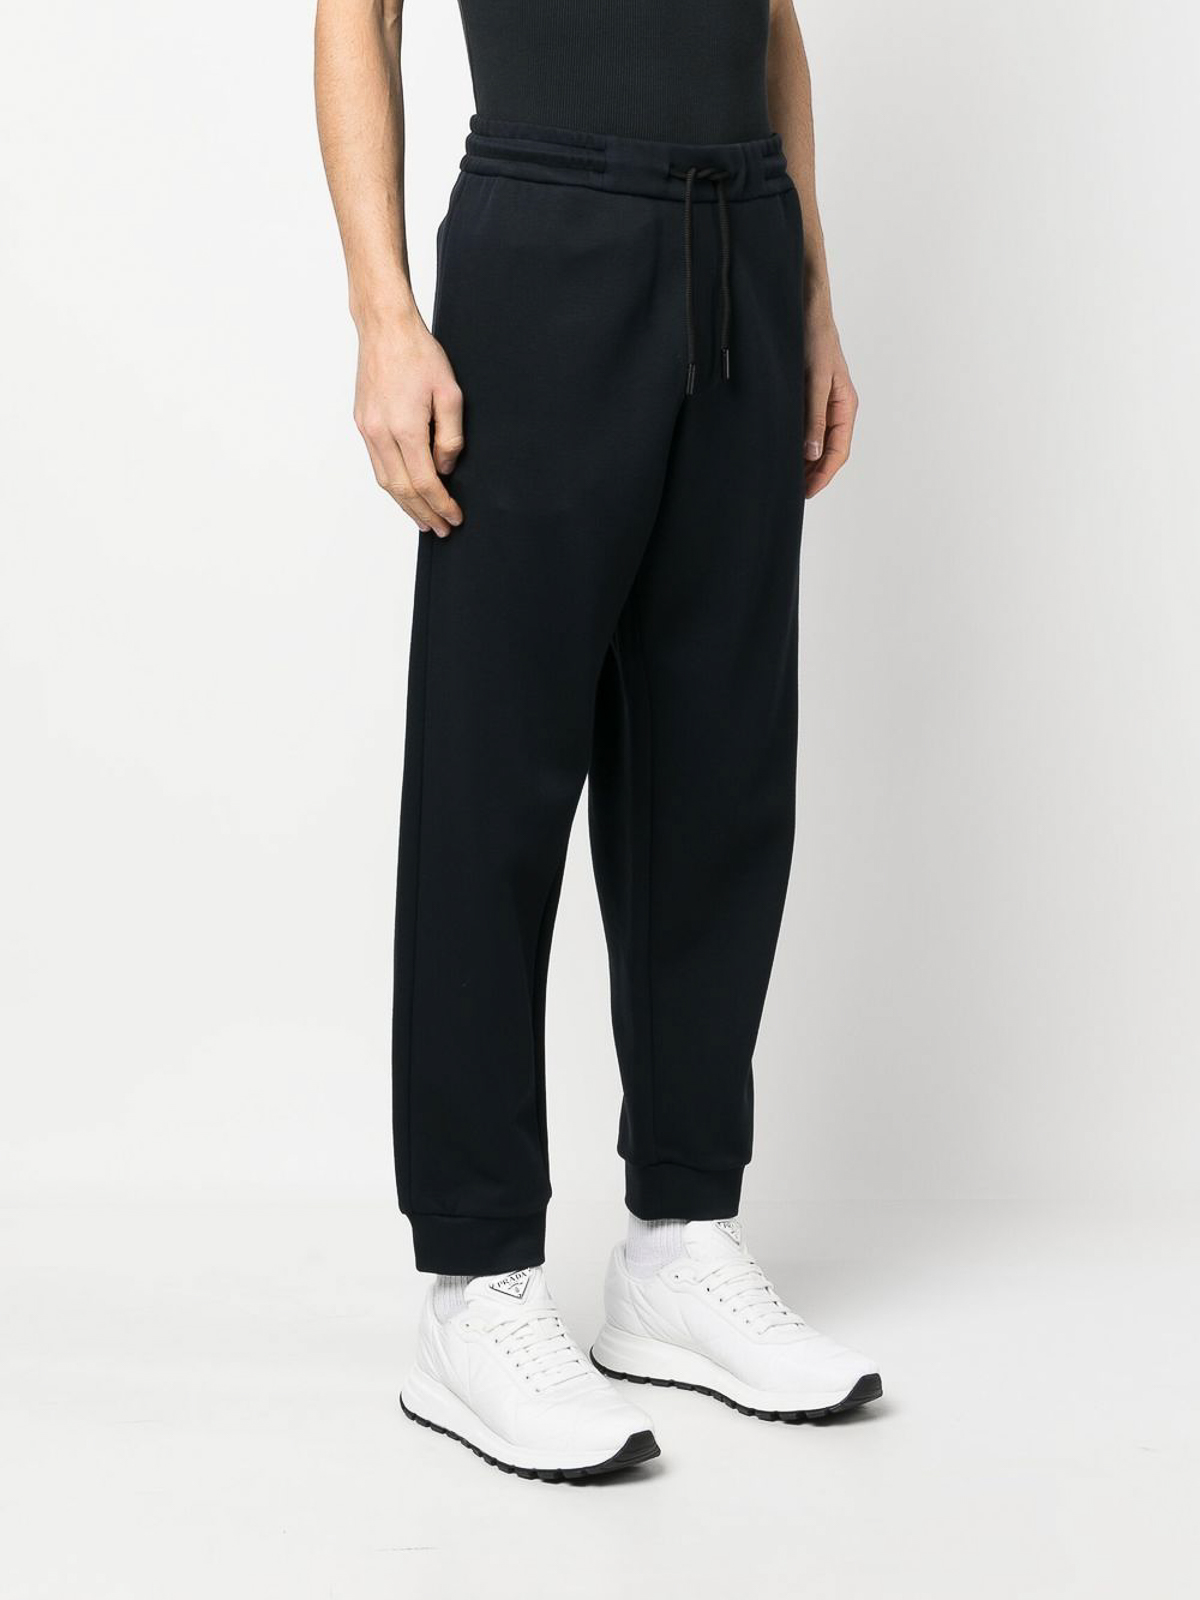 Buy Vintage Emporio Armani Trousers Online in India - Etsy